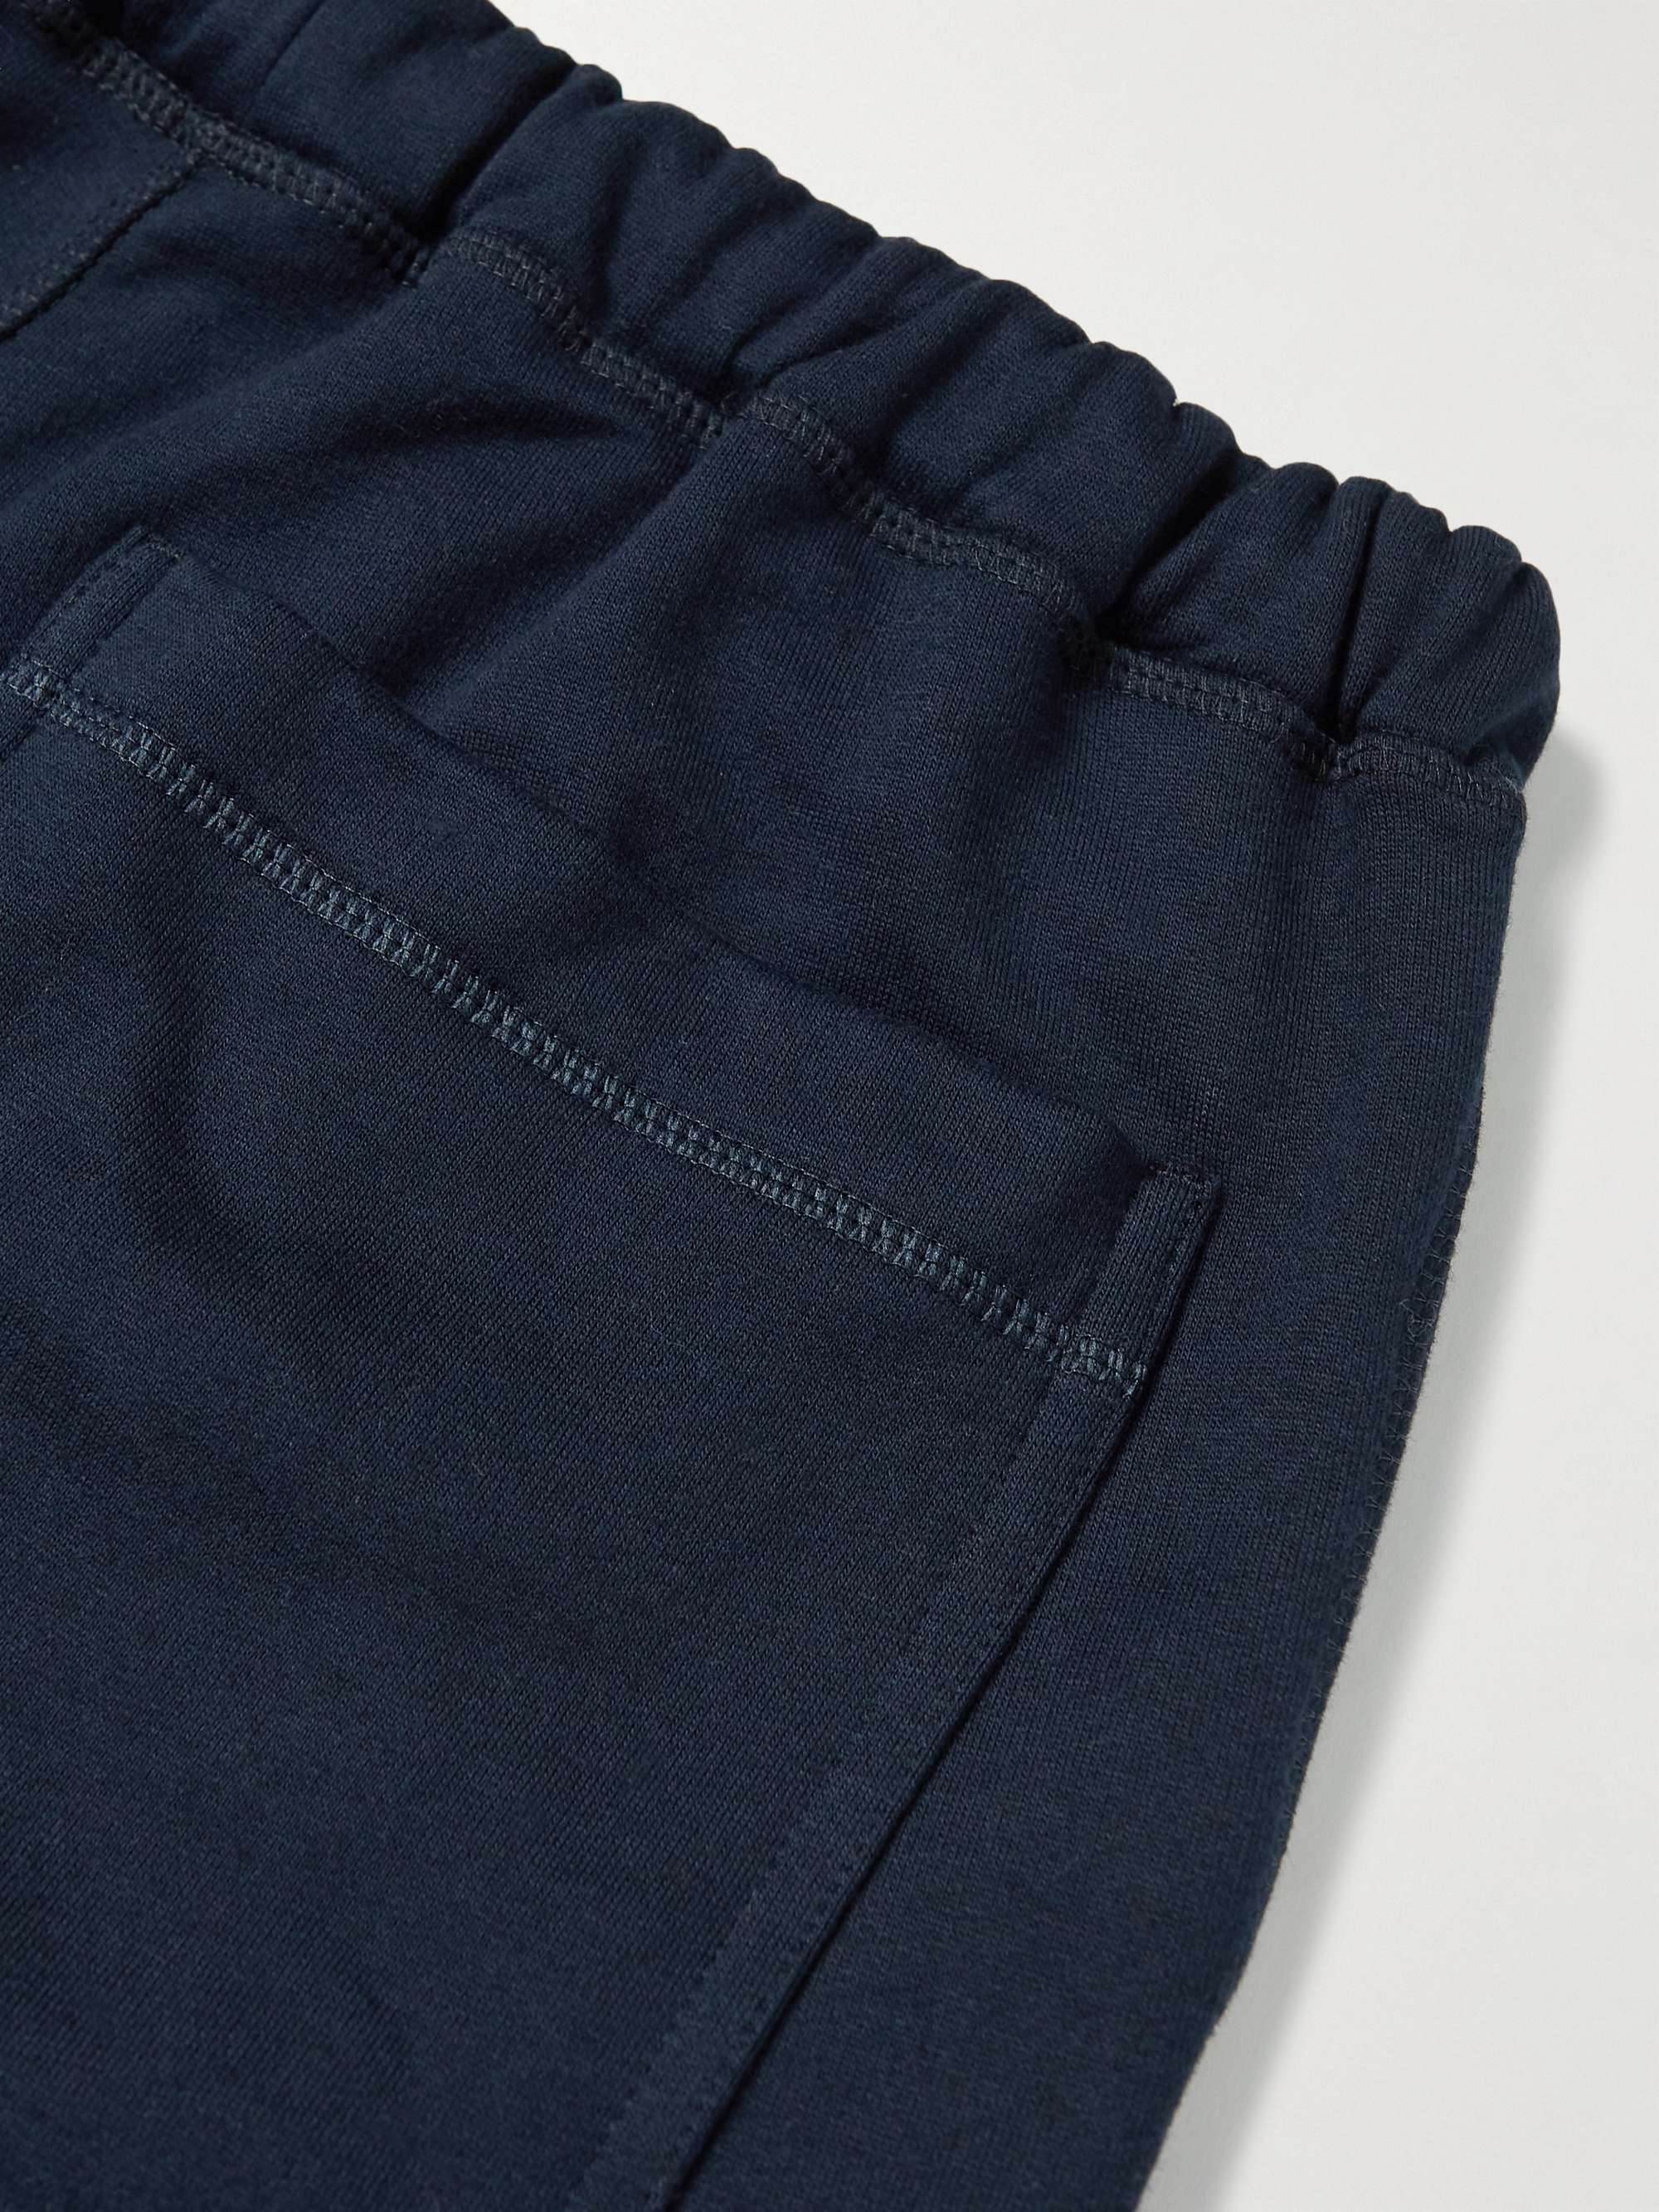 PRIVATE WHITE V.C. Straight-Leg Cotton, Wool and Cashmere-Blend Jersey Sweatpants